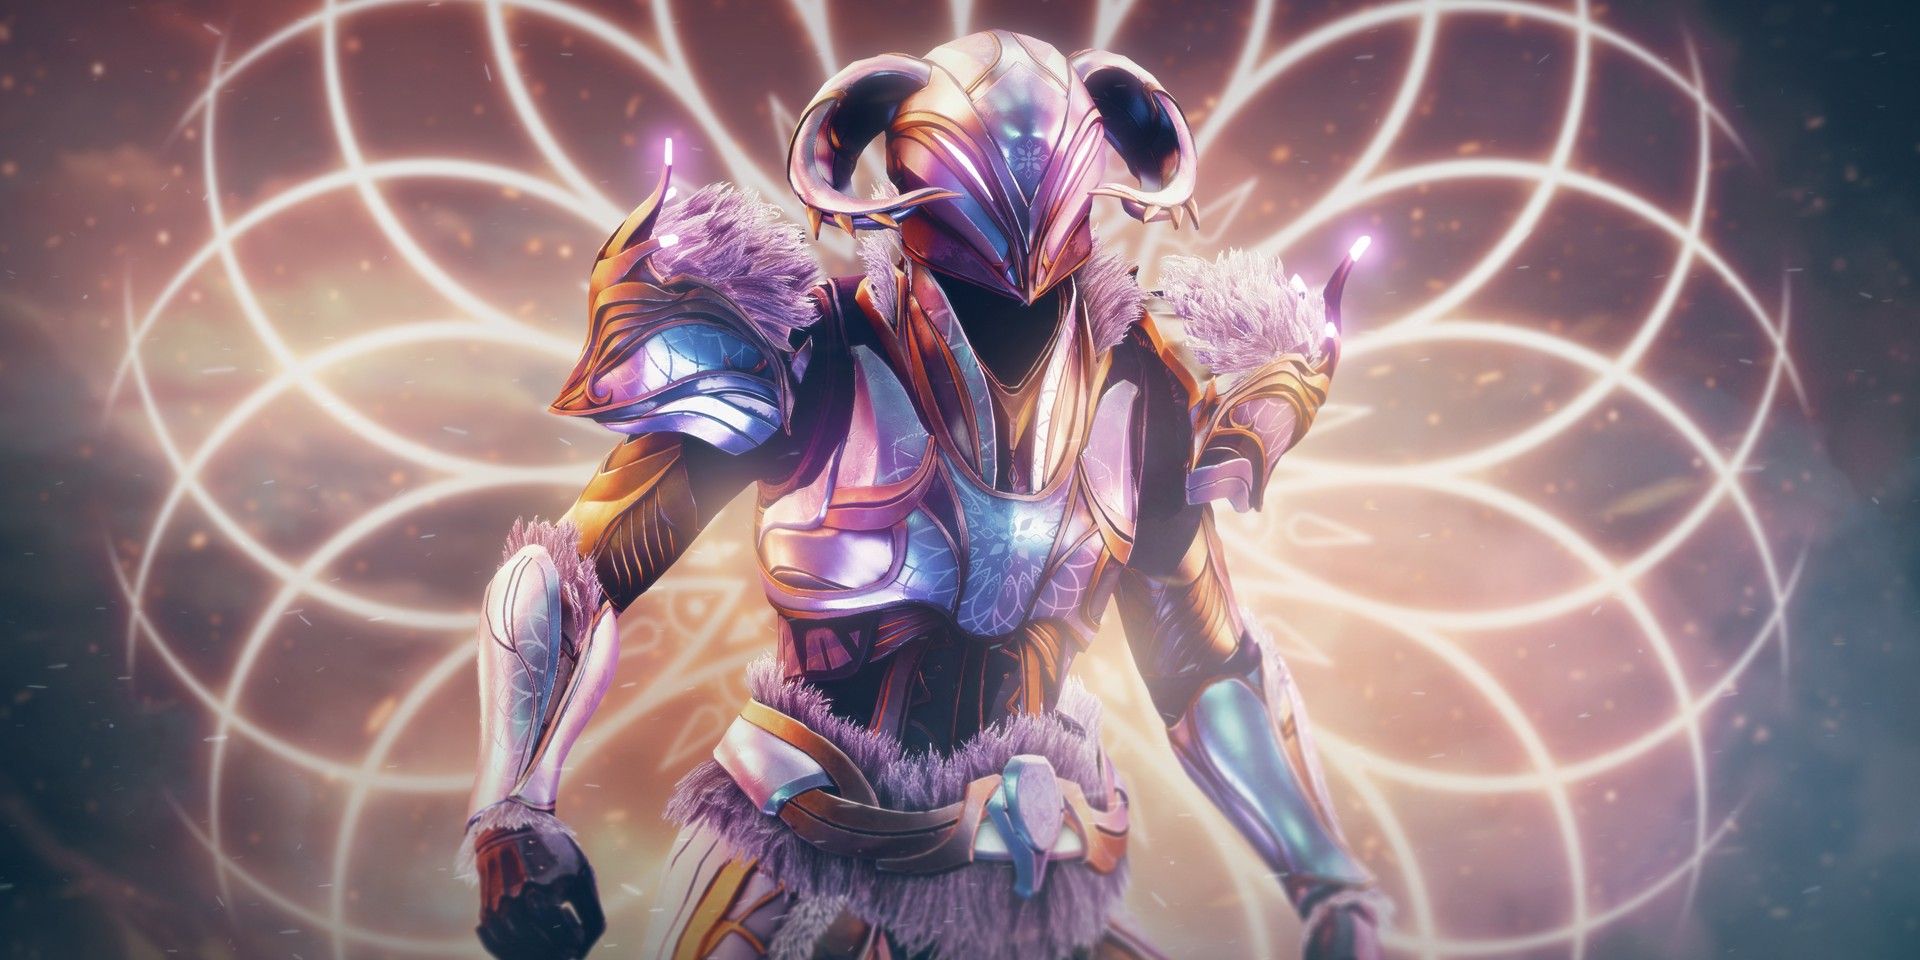 A Destiny 2 Titan-class Guardian in Pruina Luster armor with the symbol of the Dawning event in the background.